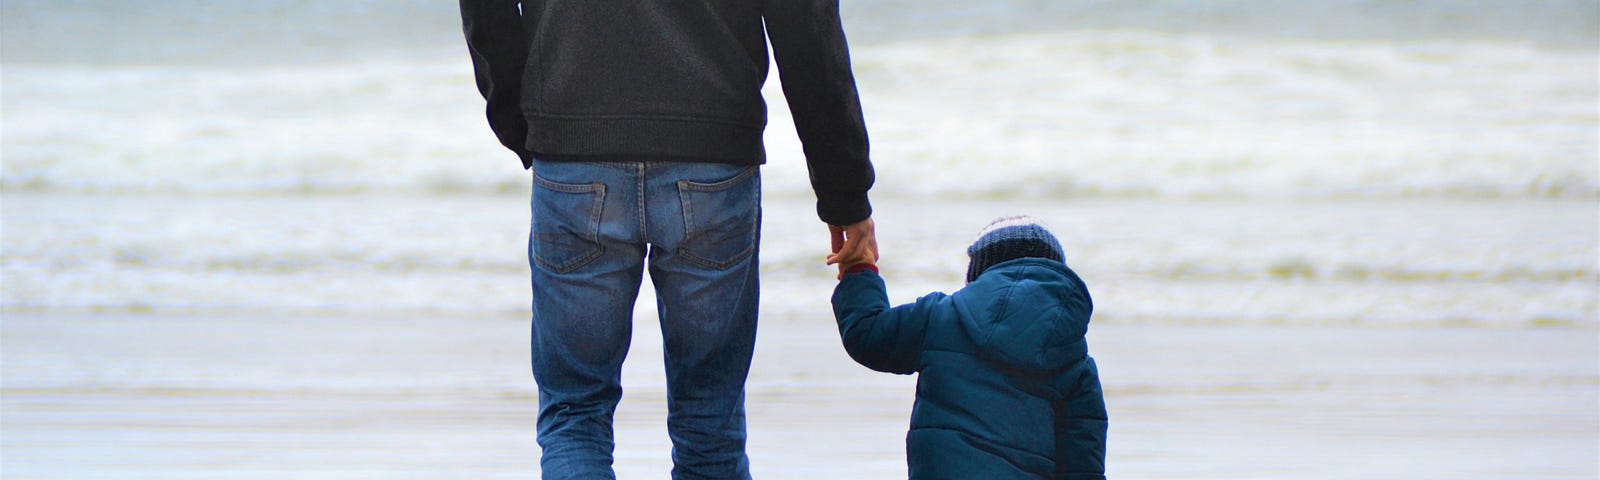 a dad walking hand-in-hand with his son along a beach with waves crashing the shoreline.